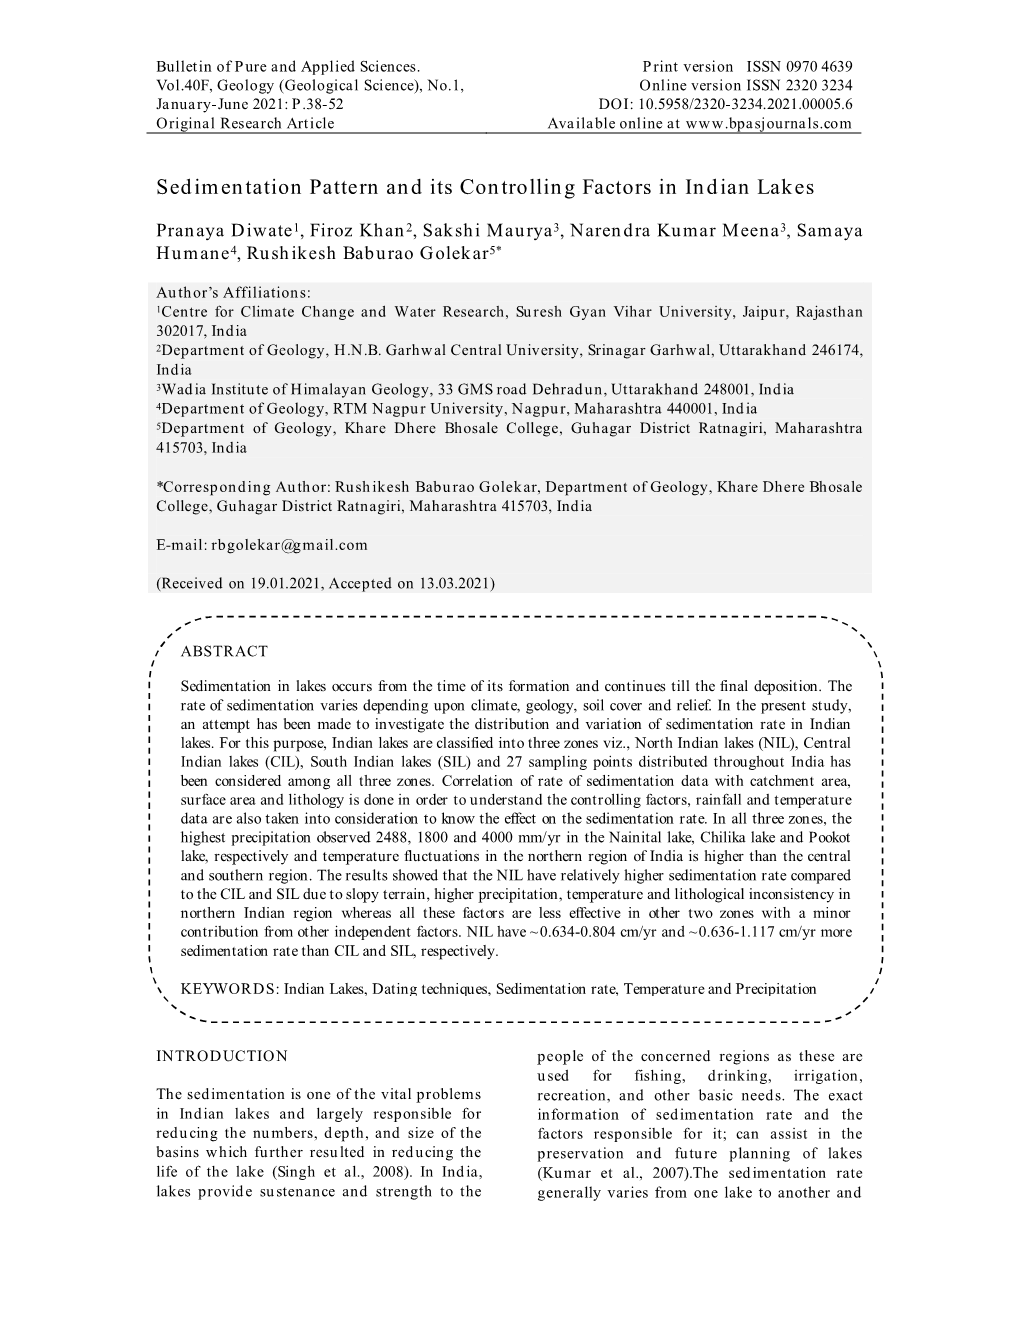 Sedimentation Pattern and Its Controlling Factors in Indian Lakes